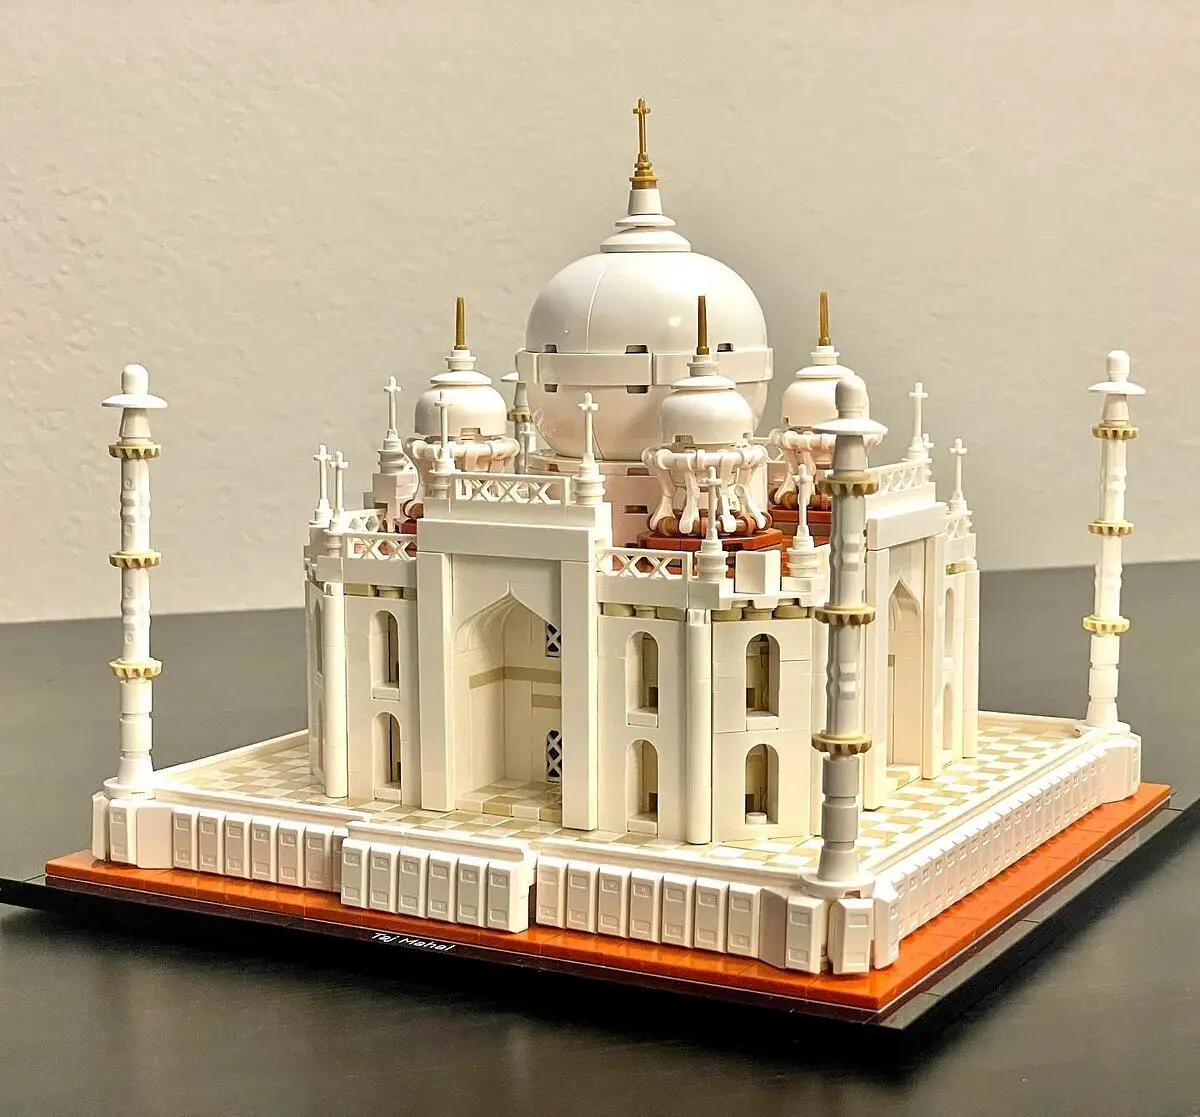 LEGO Architecture Taj Mahal 21056 Building Set - Landmarks Collection,  Display Model, Collectible Home Décor Gift Idea and Model Kits for Adults  and Architects to Build 